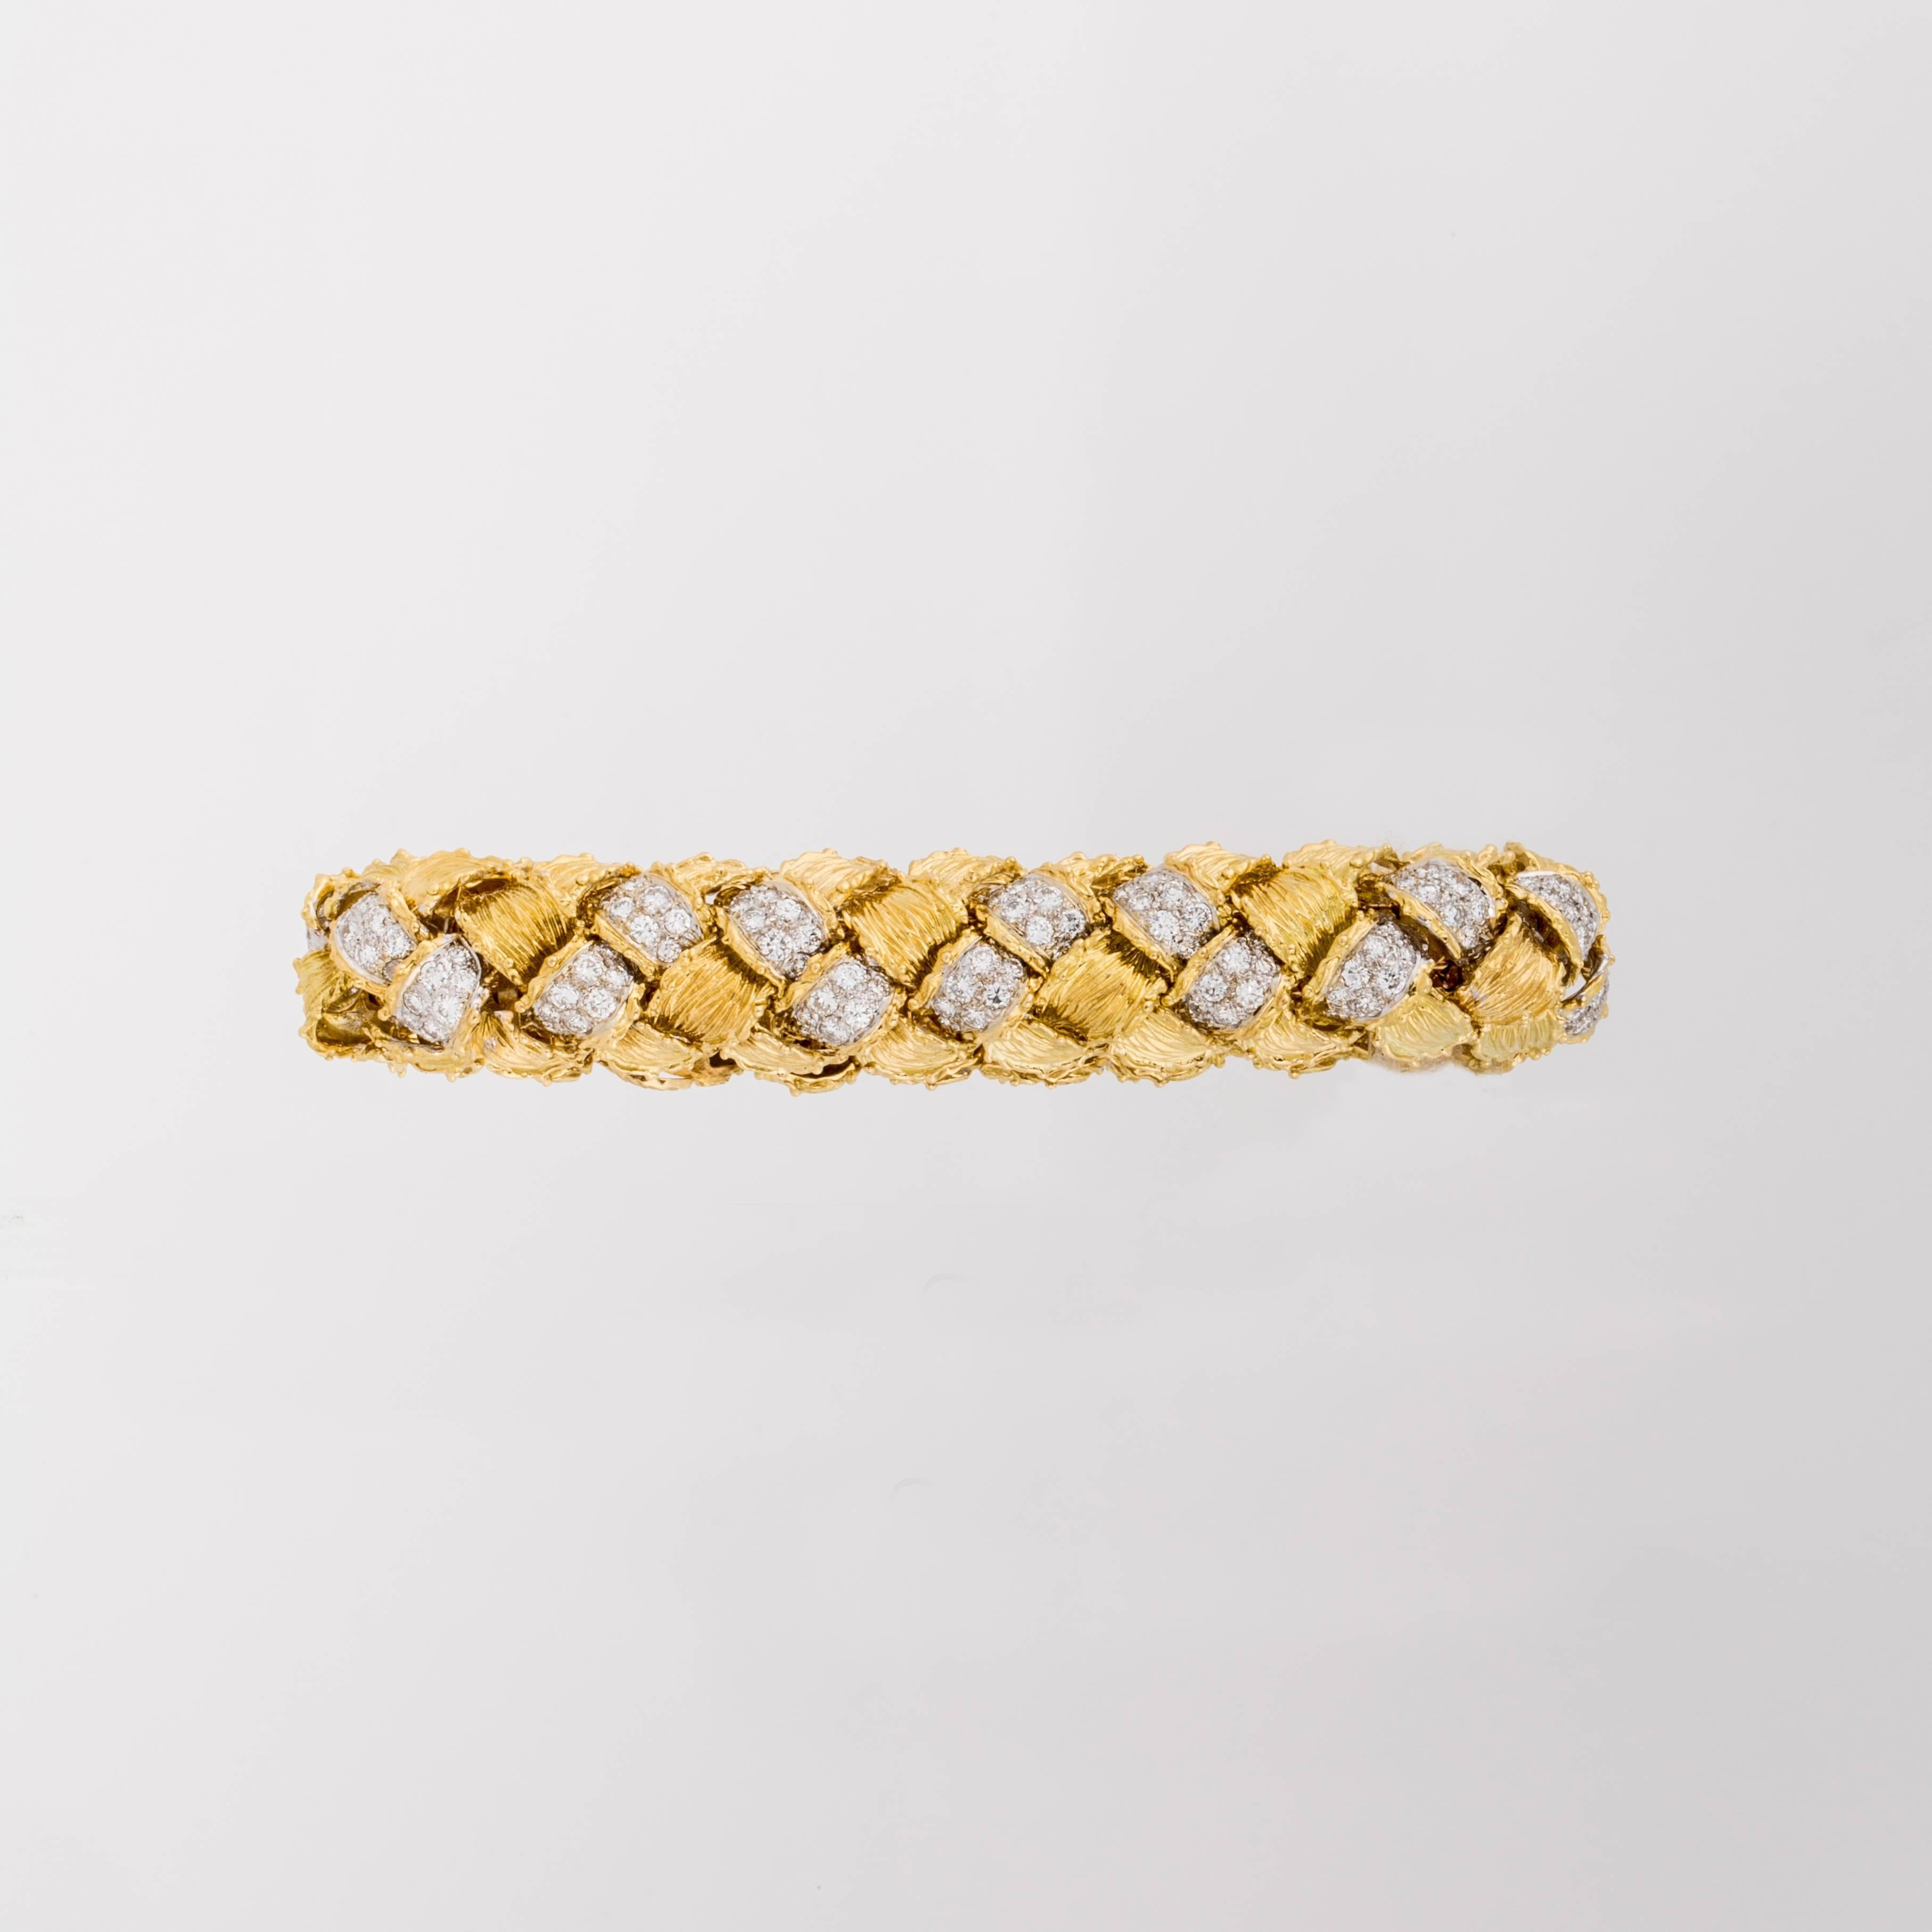 Hammerman Bros. bracelet in 18K yellow gold with round diamonds.  The woven style bracelet is set with 224 round brilliant-cut diamonds totaling 11.45 carats, F-G color and VVS-VS clarity.  Measures 7 1/2 inches long and 5/8 inches wide.  Marked